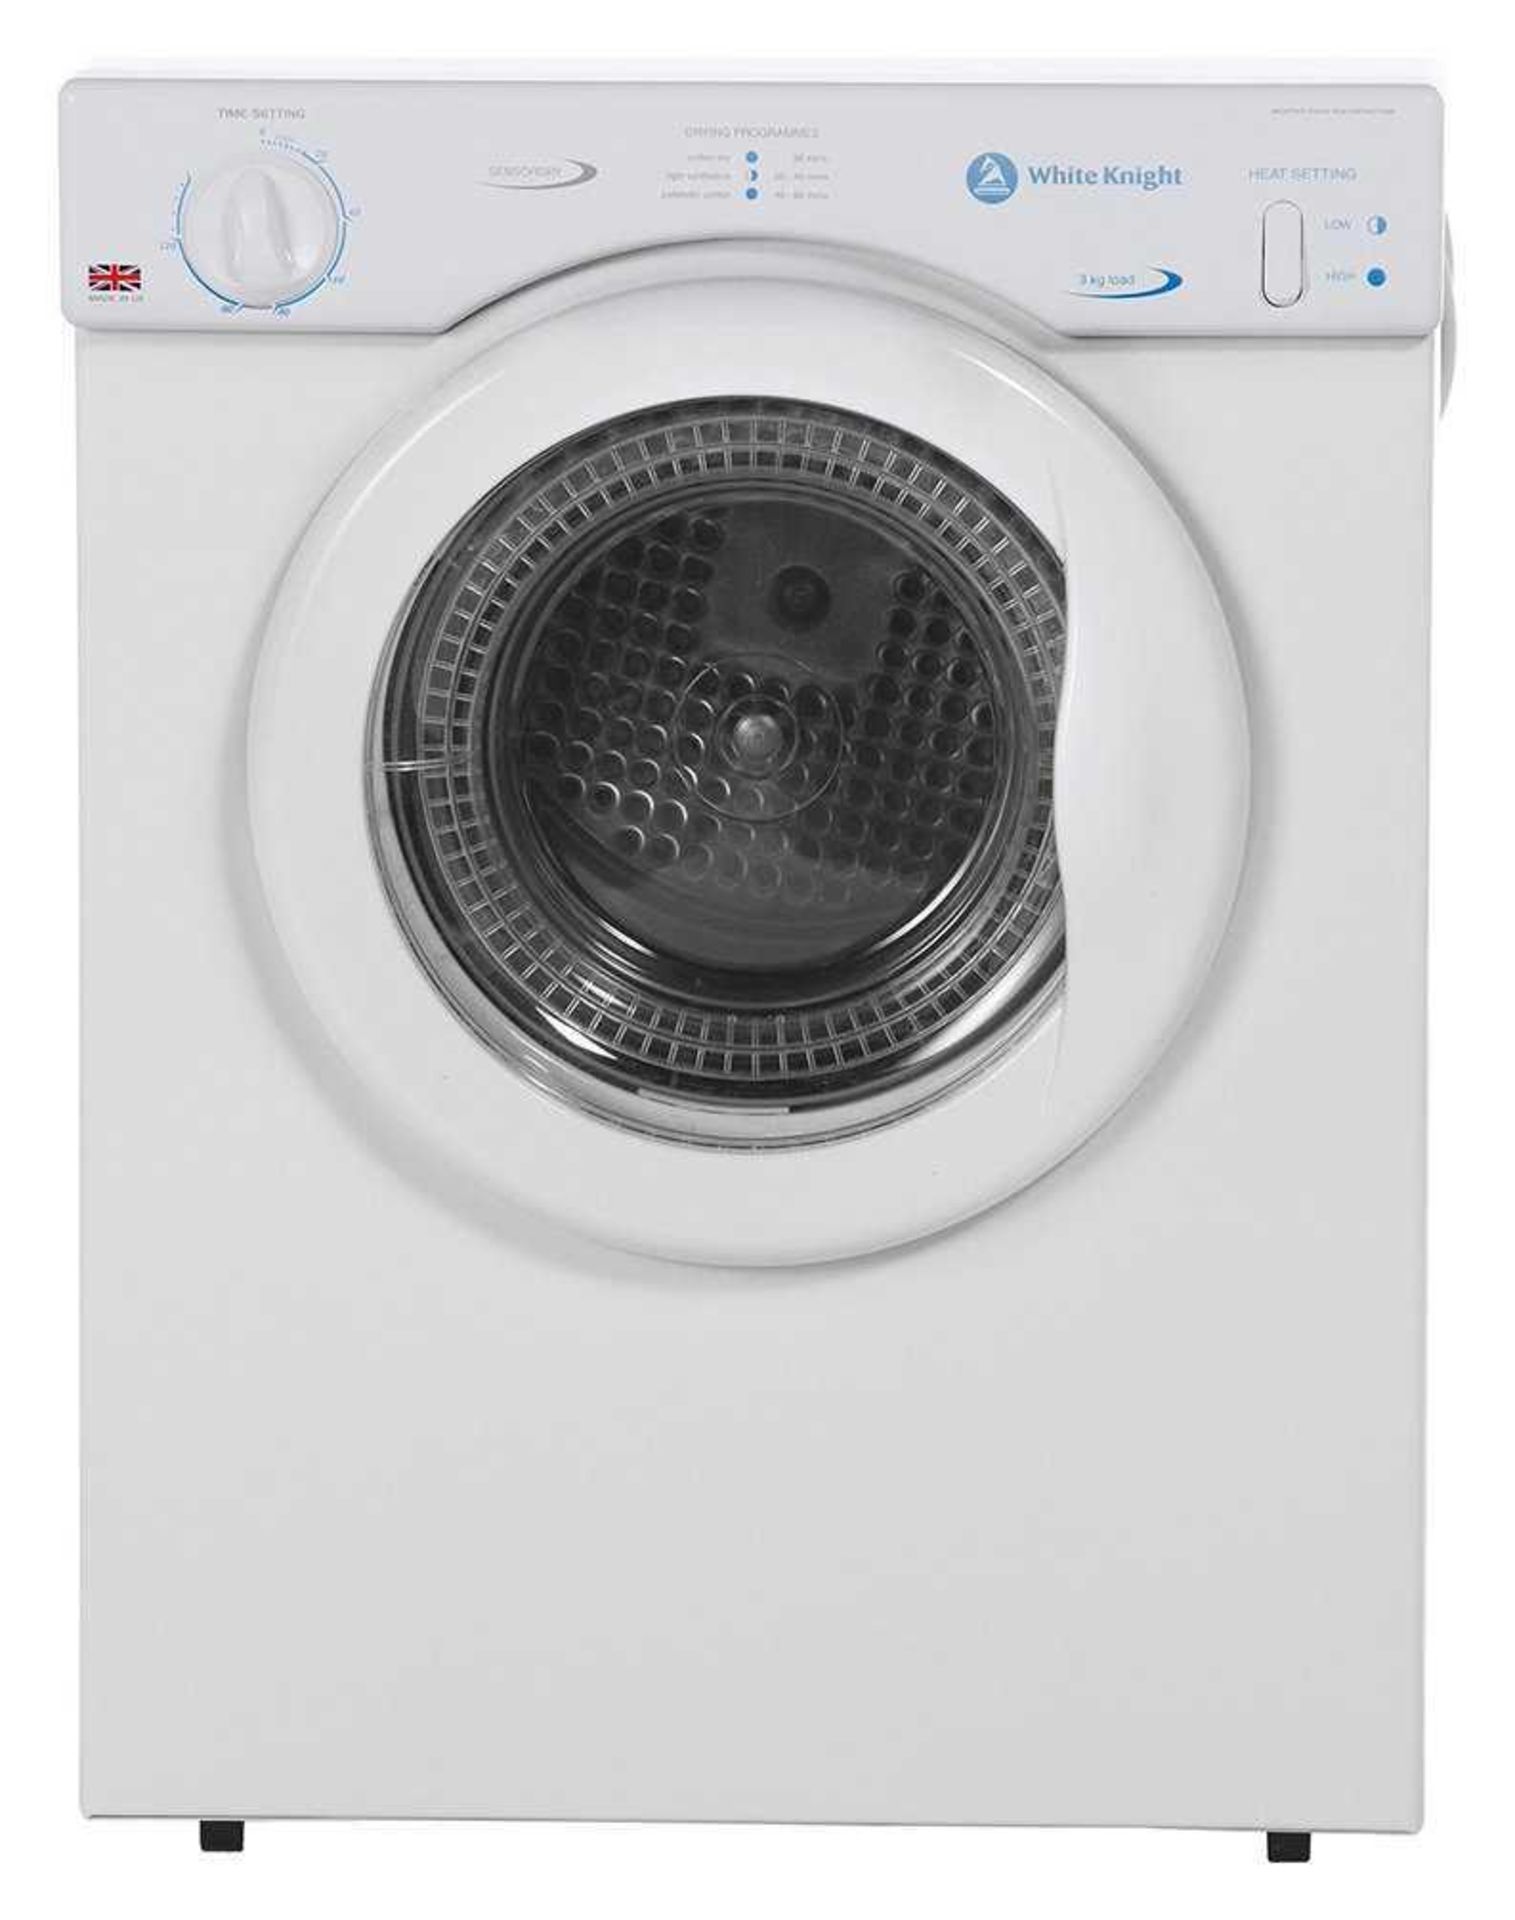 Boxed Grade B White Knight 3Kg Unidirectional Compact Tumble Dryer Rrp £180 - Image 2 of 2